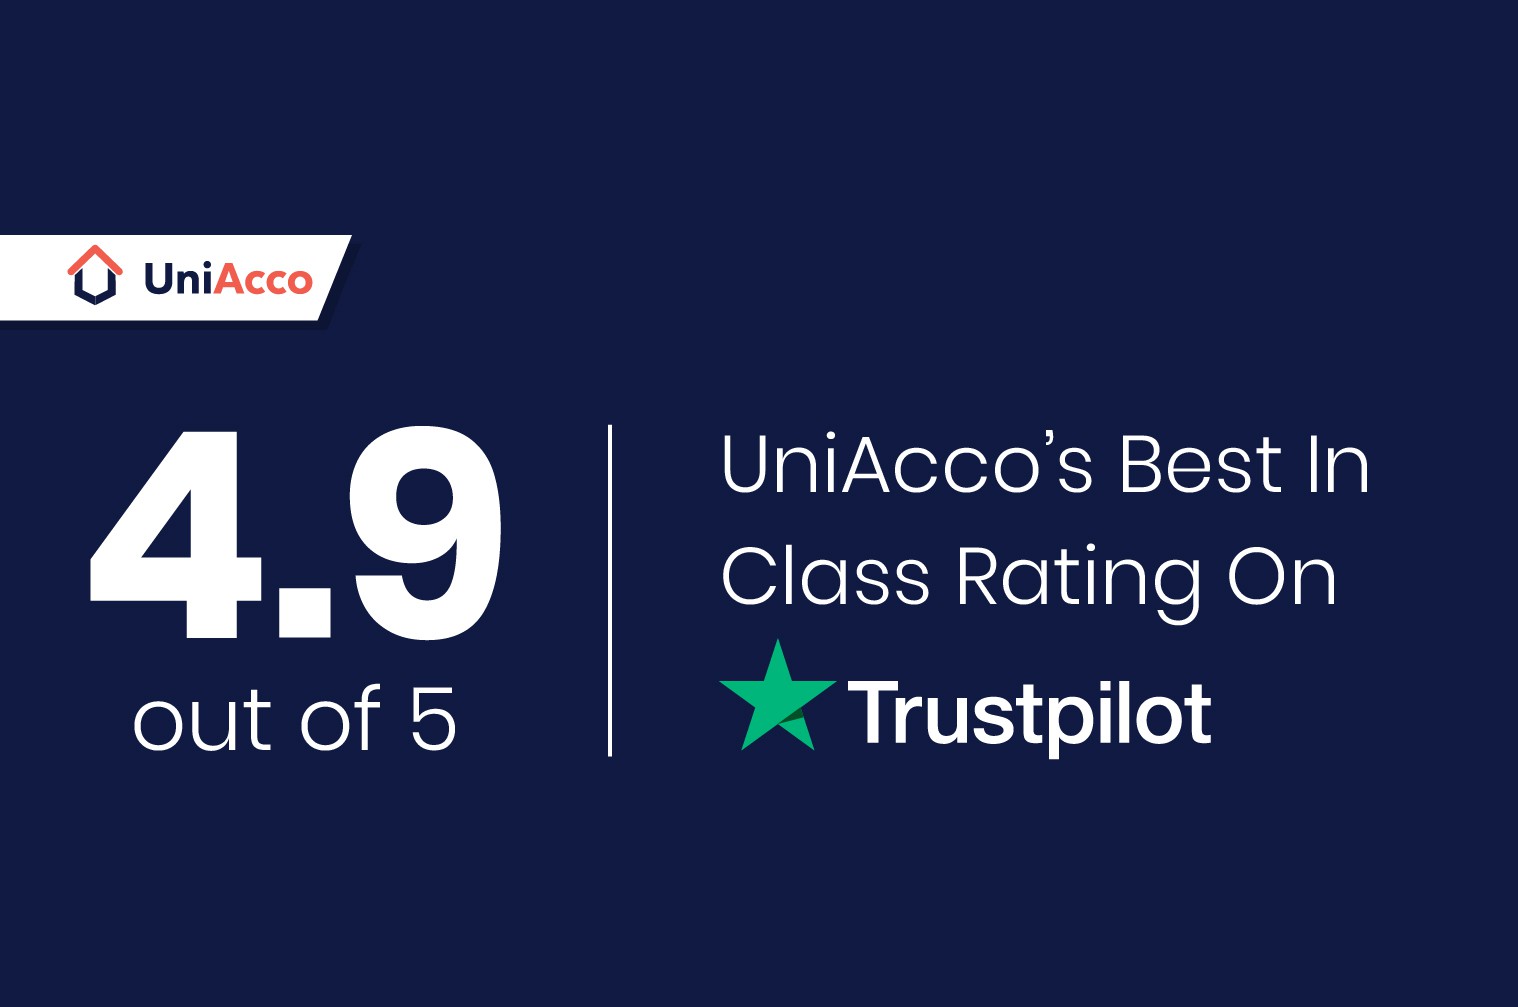 UniAcco's Best In Class Rating On Trustpilot